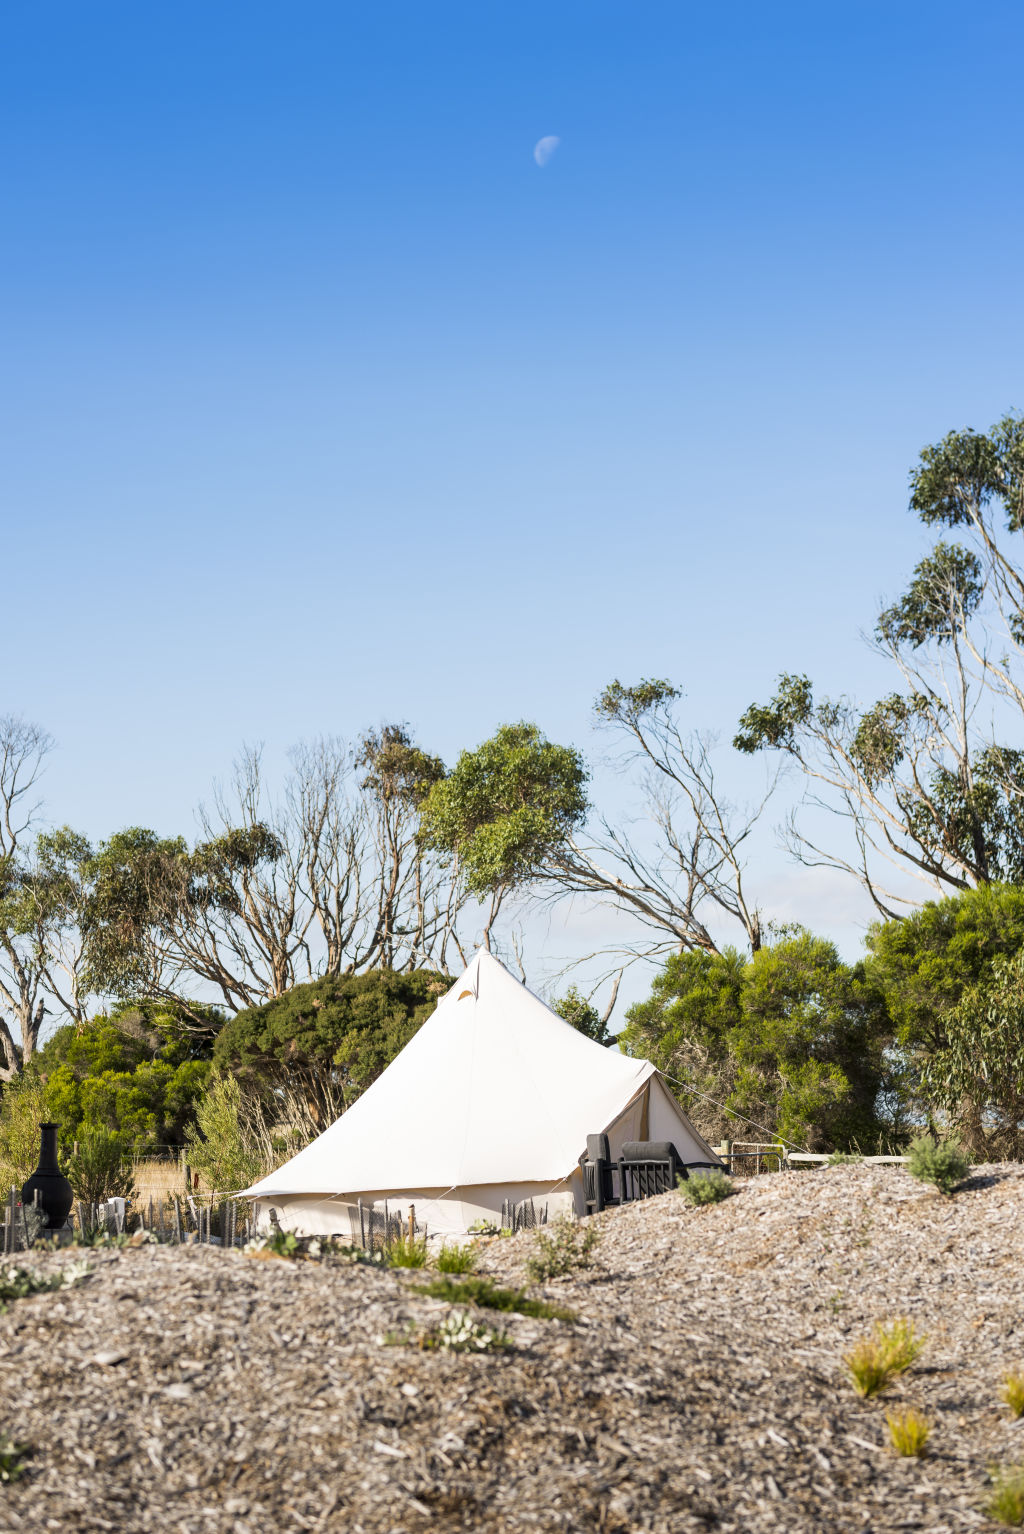 Popular with holiday makers is The Inverloch Camping Co, for stays right on the beach.  Photo: Rob Blackburn